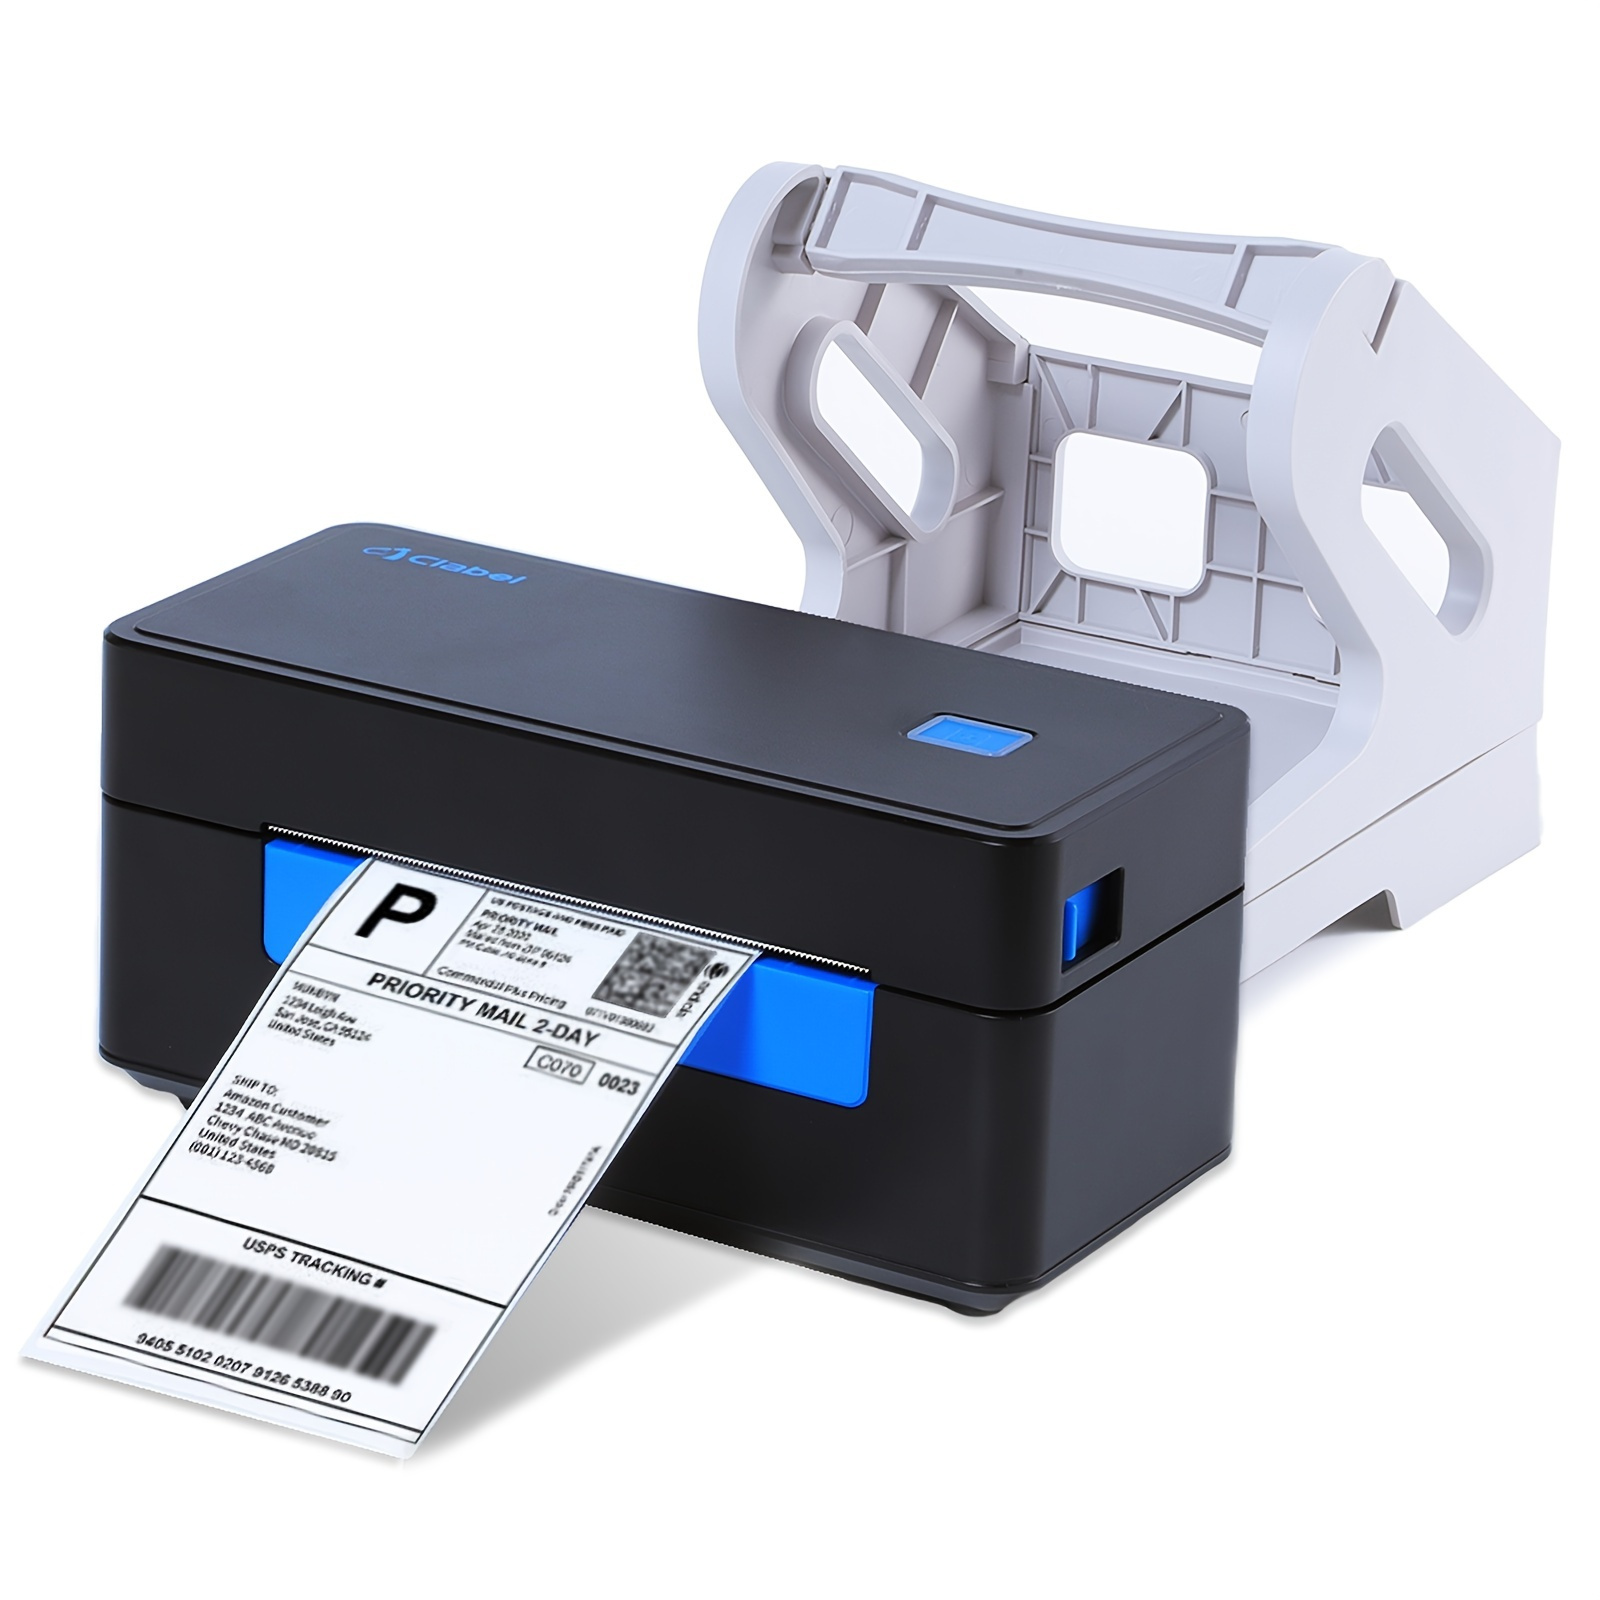  iDPRT Bluetooth Thermal Shipping Label Printer for Phone, 4x6  Printer, Support Windows/Mac/iOS/Android, Thermal Printer for Small  Business and Shipping Package, Used for , , UPS, USPS : Office  Products